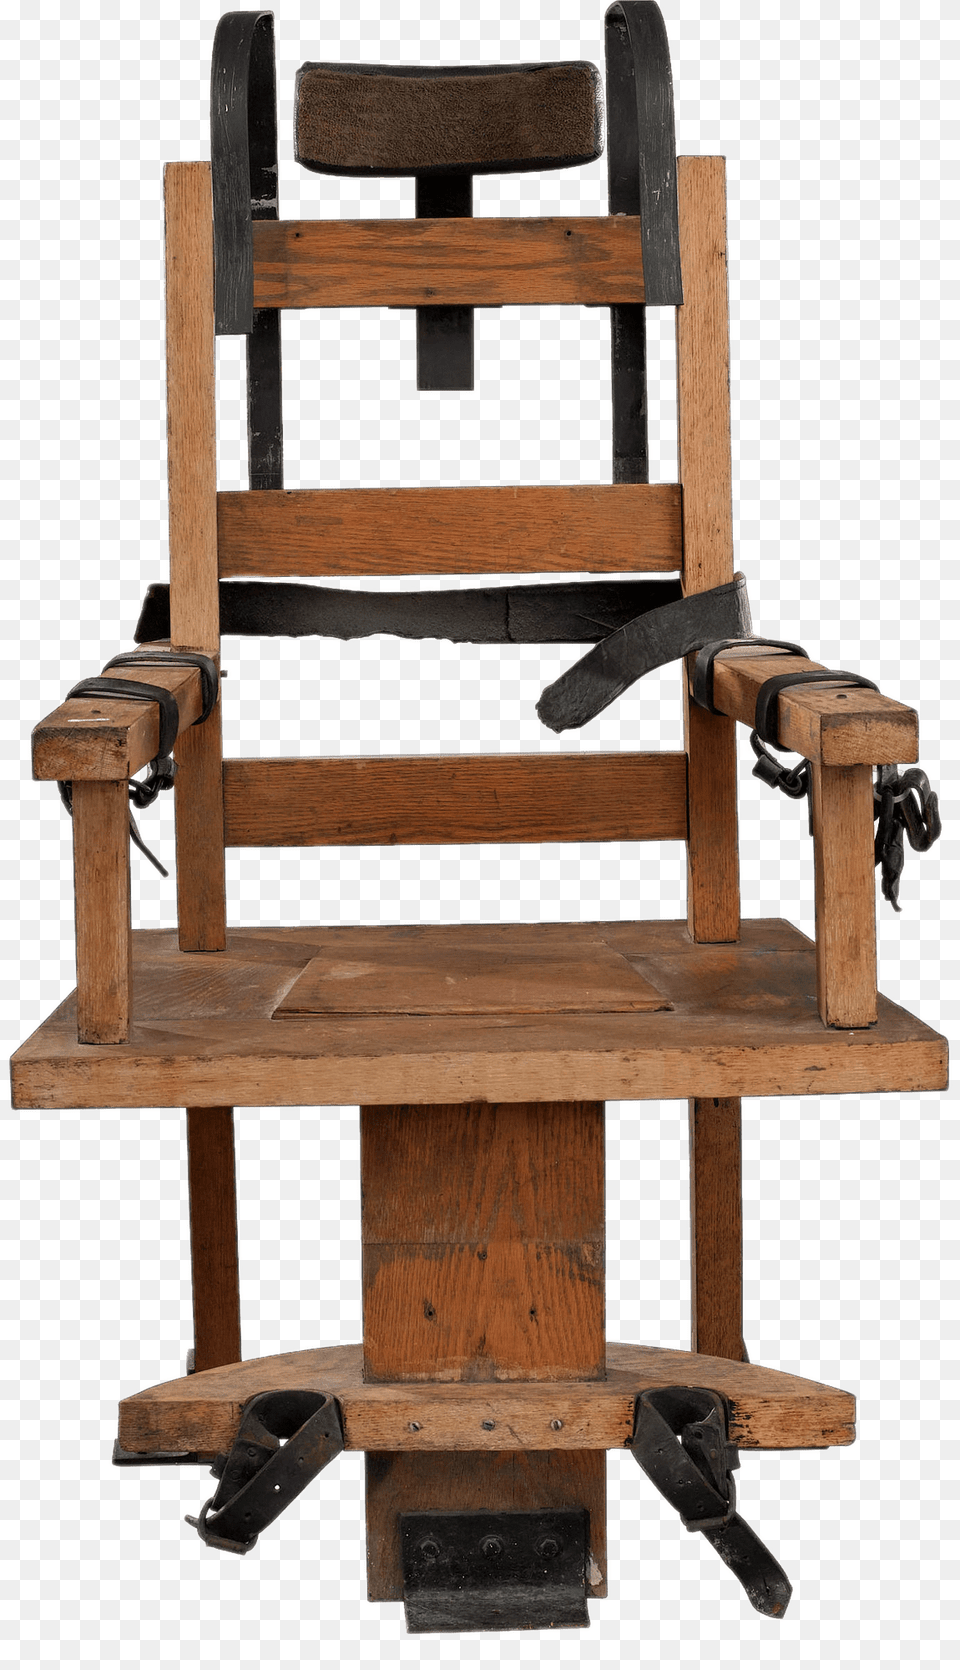 Electric Chair With Black Shoulder Holders, Furniture, Wood, Weapon, Tool Png